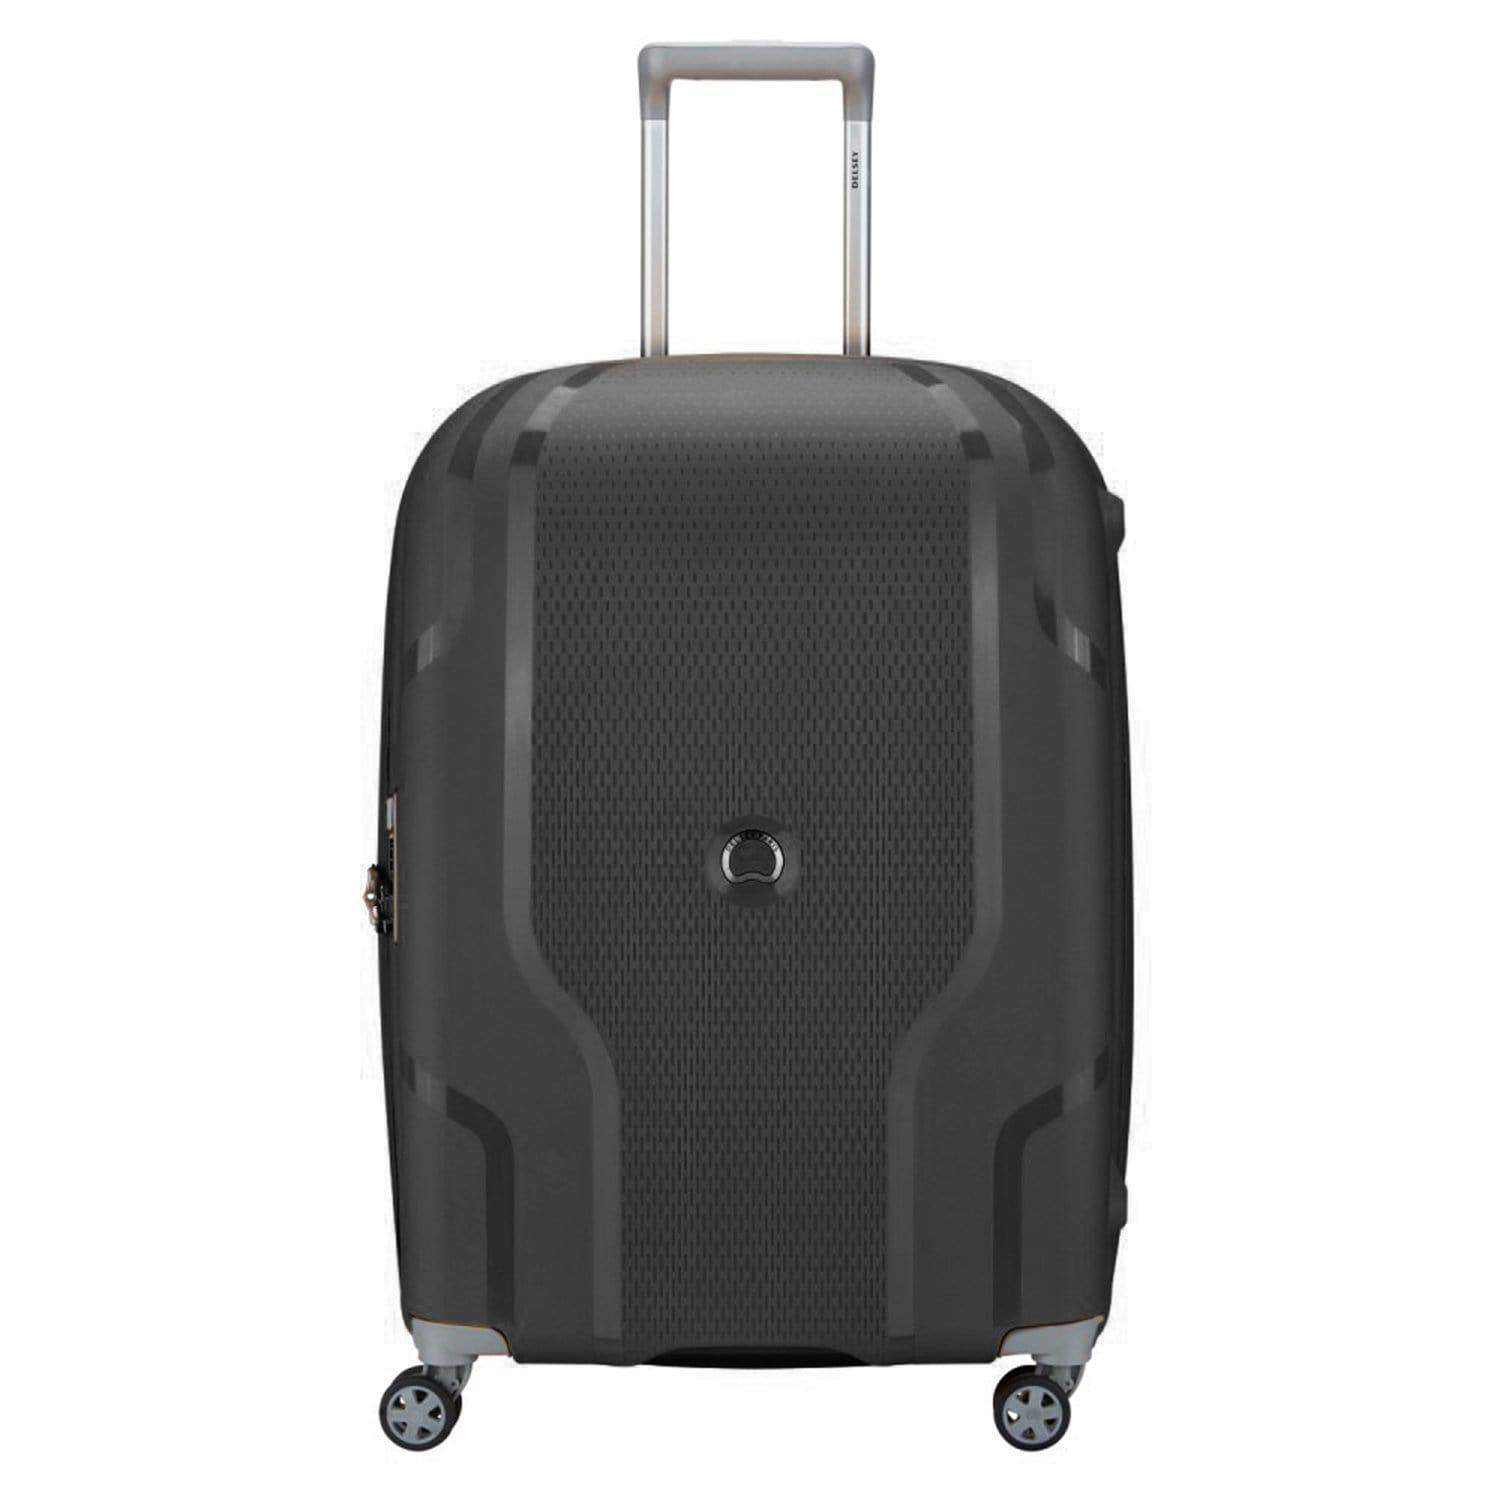 Delsey Clavel 71 cm Expandable 4 Double Wheel Check-In Luggage Trolley Black - 00384582000